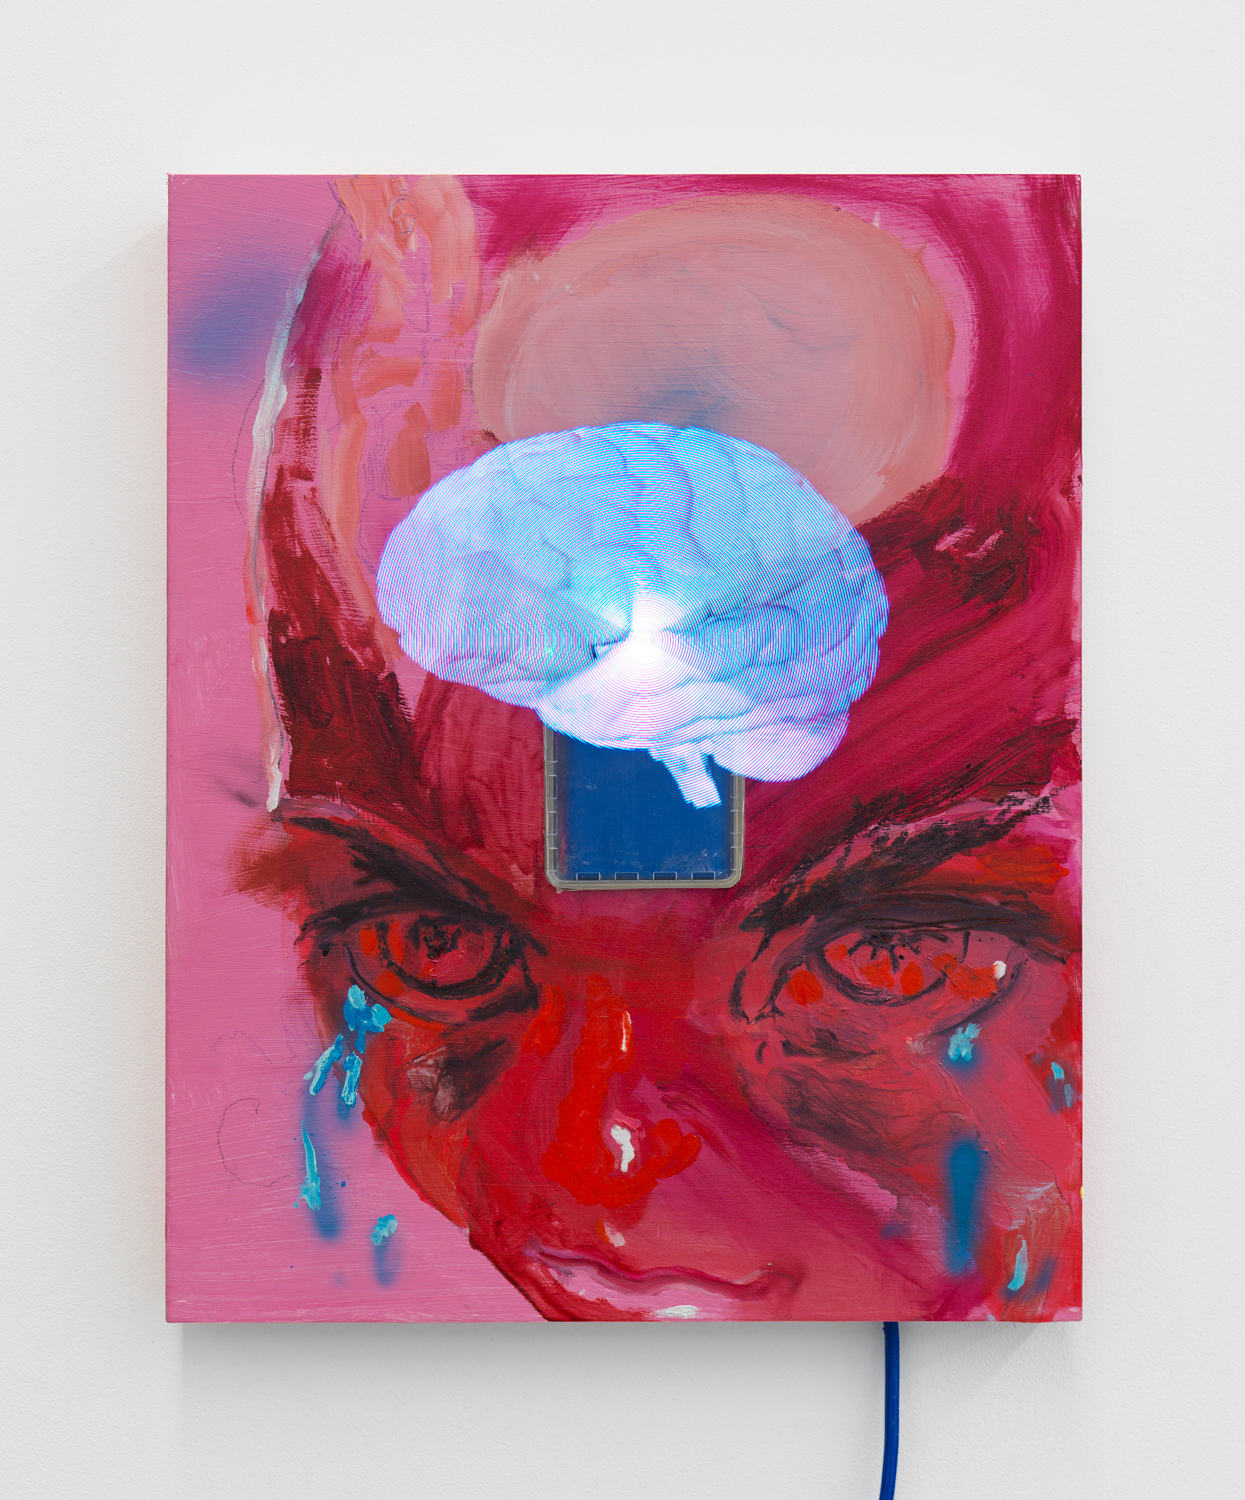 Rachel Rossin, Boo-hoo (brain), 2020, Oil, airbrushed acrylic, and graphite on panel with embedded holographic display, 20h x 16w in.